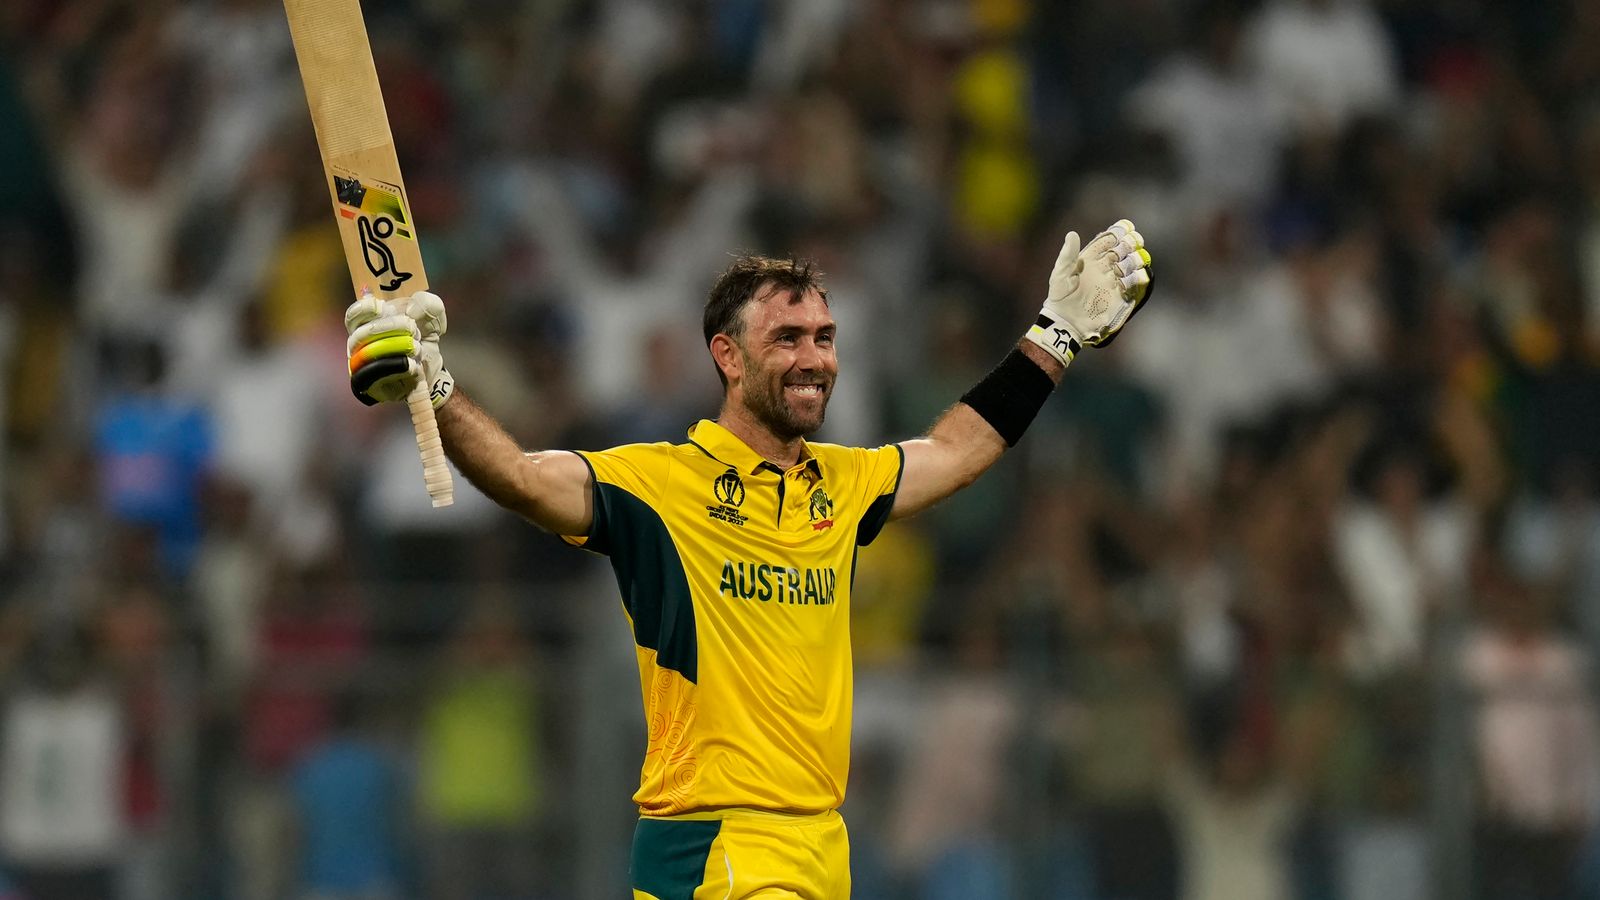 'Best ODI innings ever': Hero Maxwell overcomes injury to power Aussies to unlikely victory